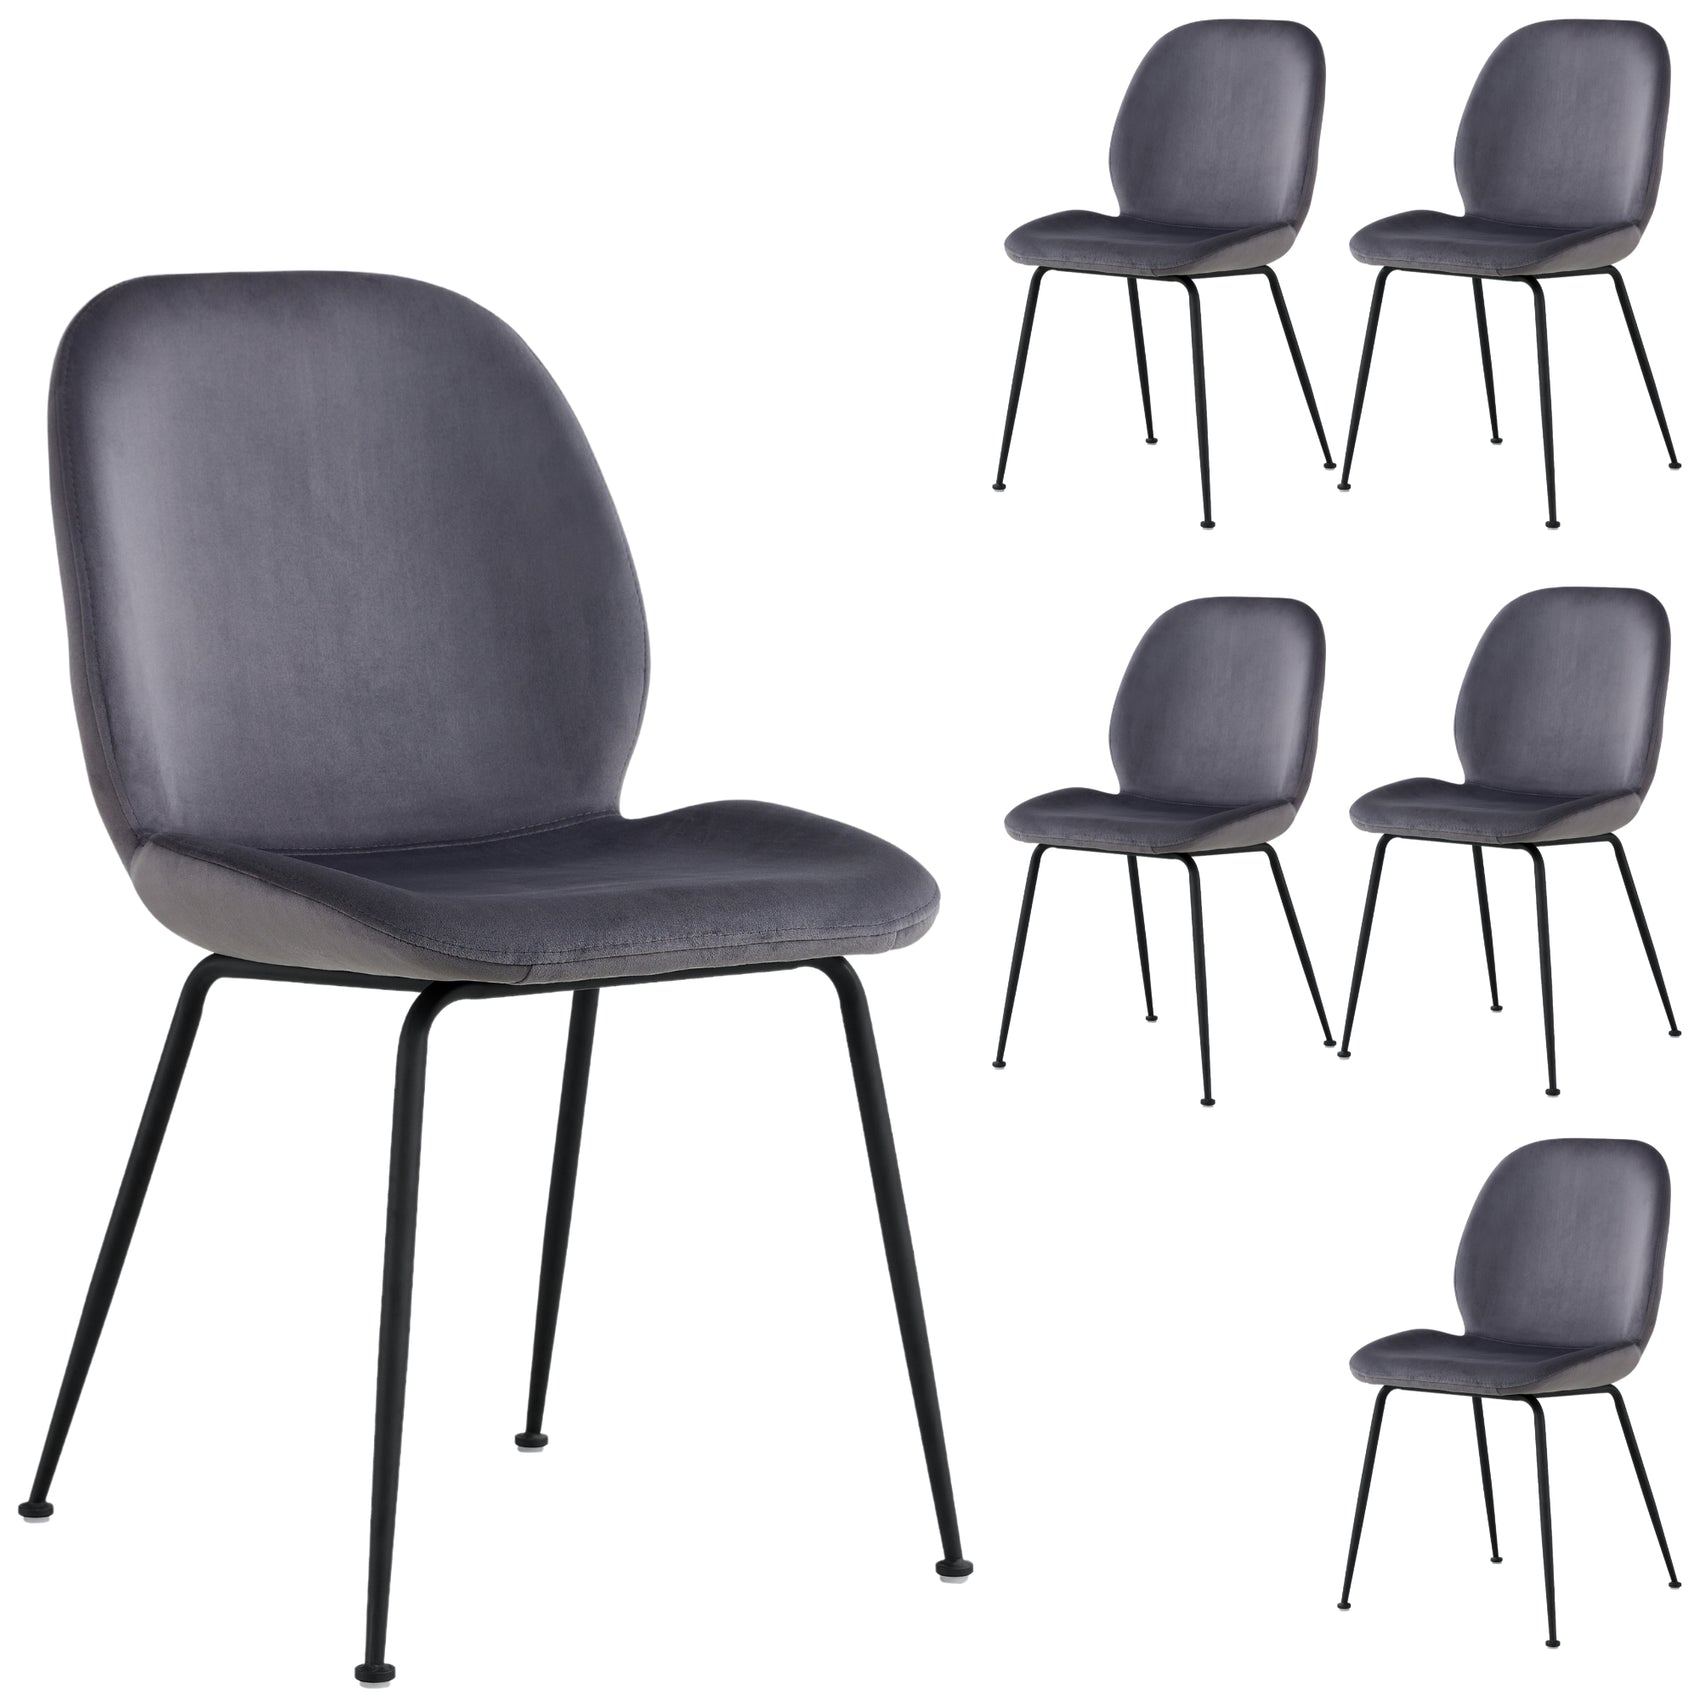 Remy Dining Chair Set of 6 Fabric Seat with Metal Frame - Charcoal